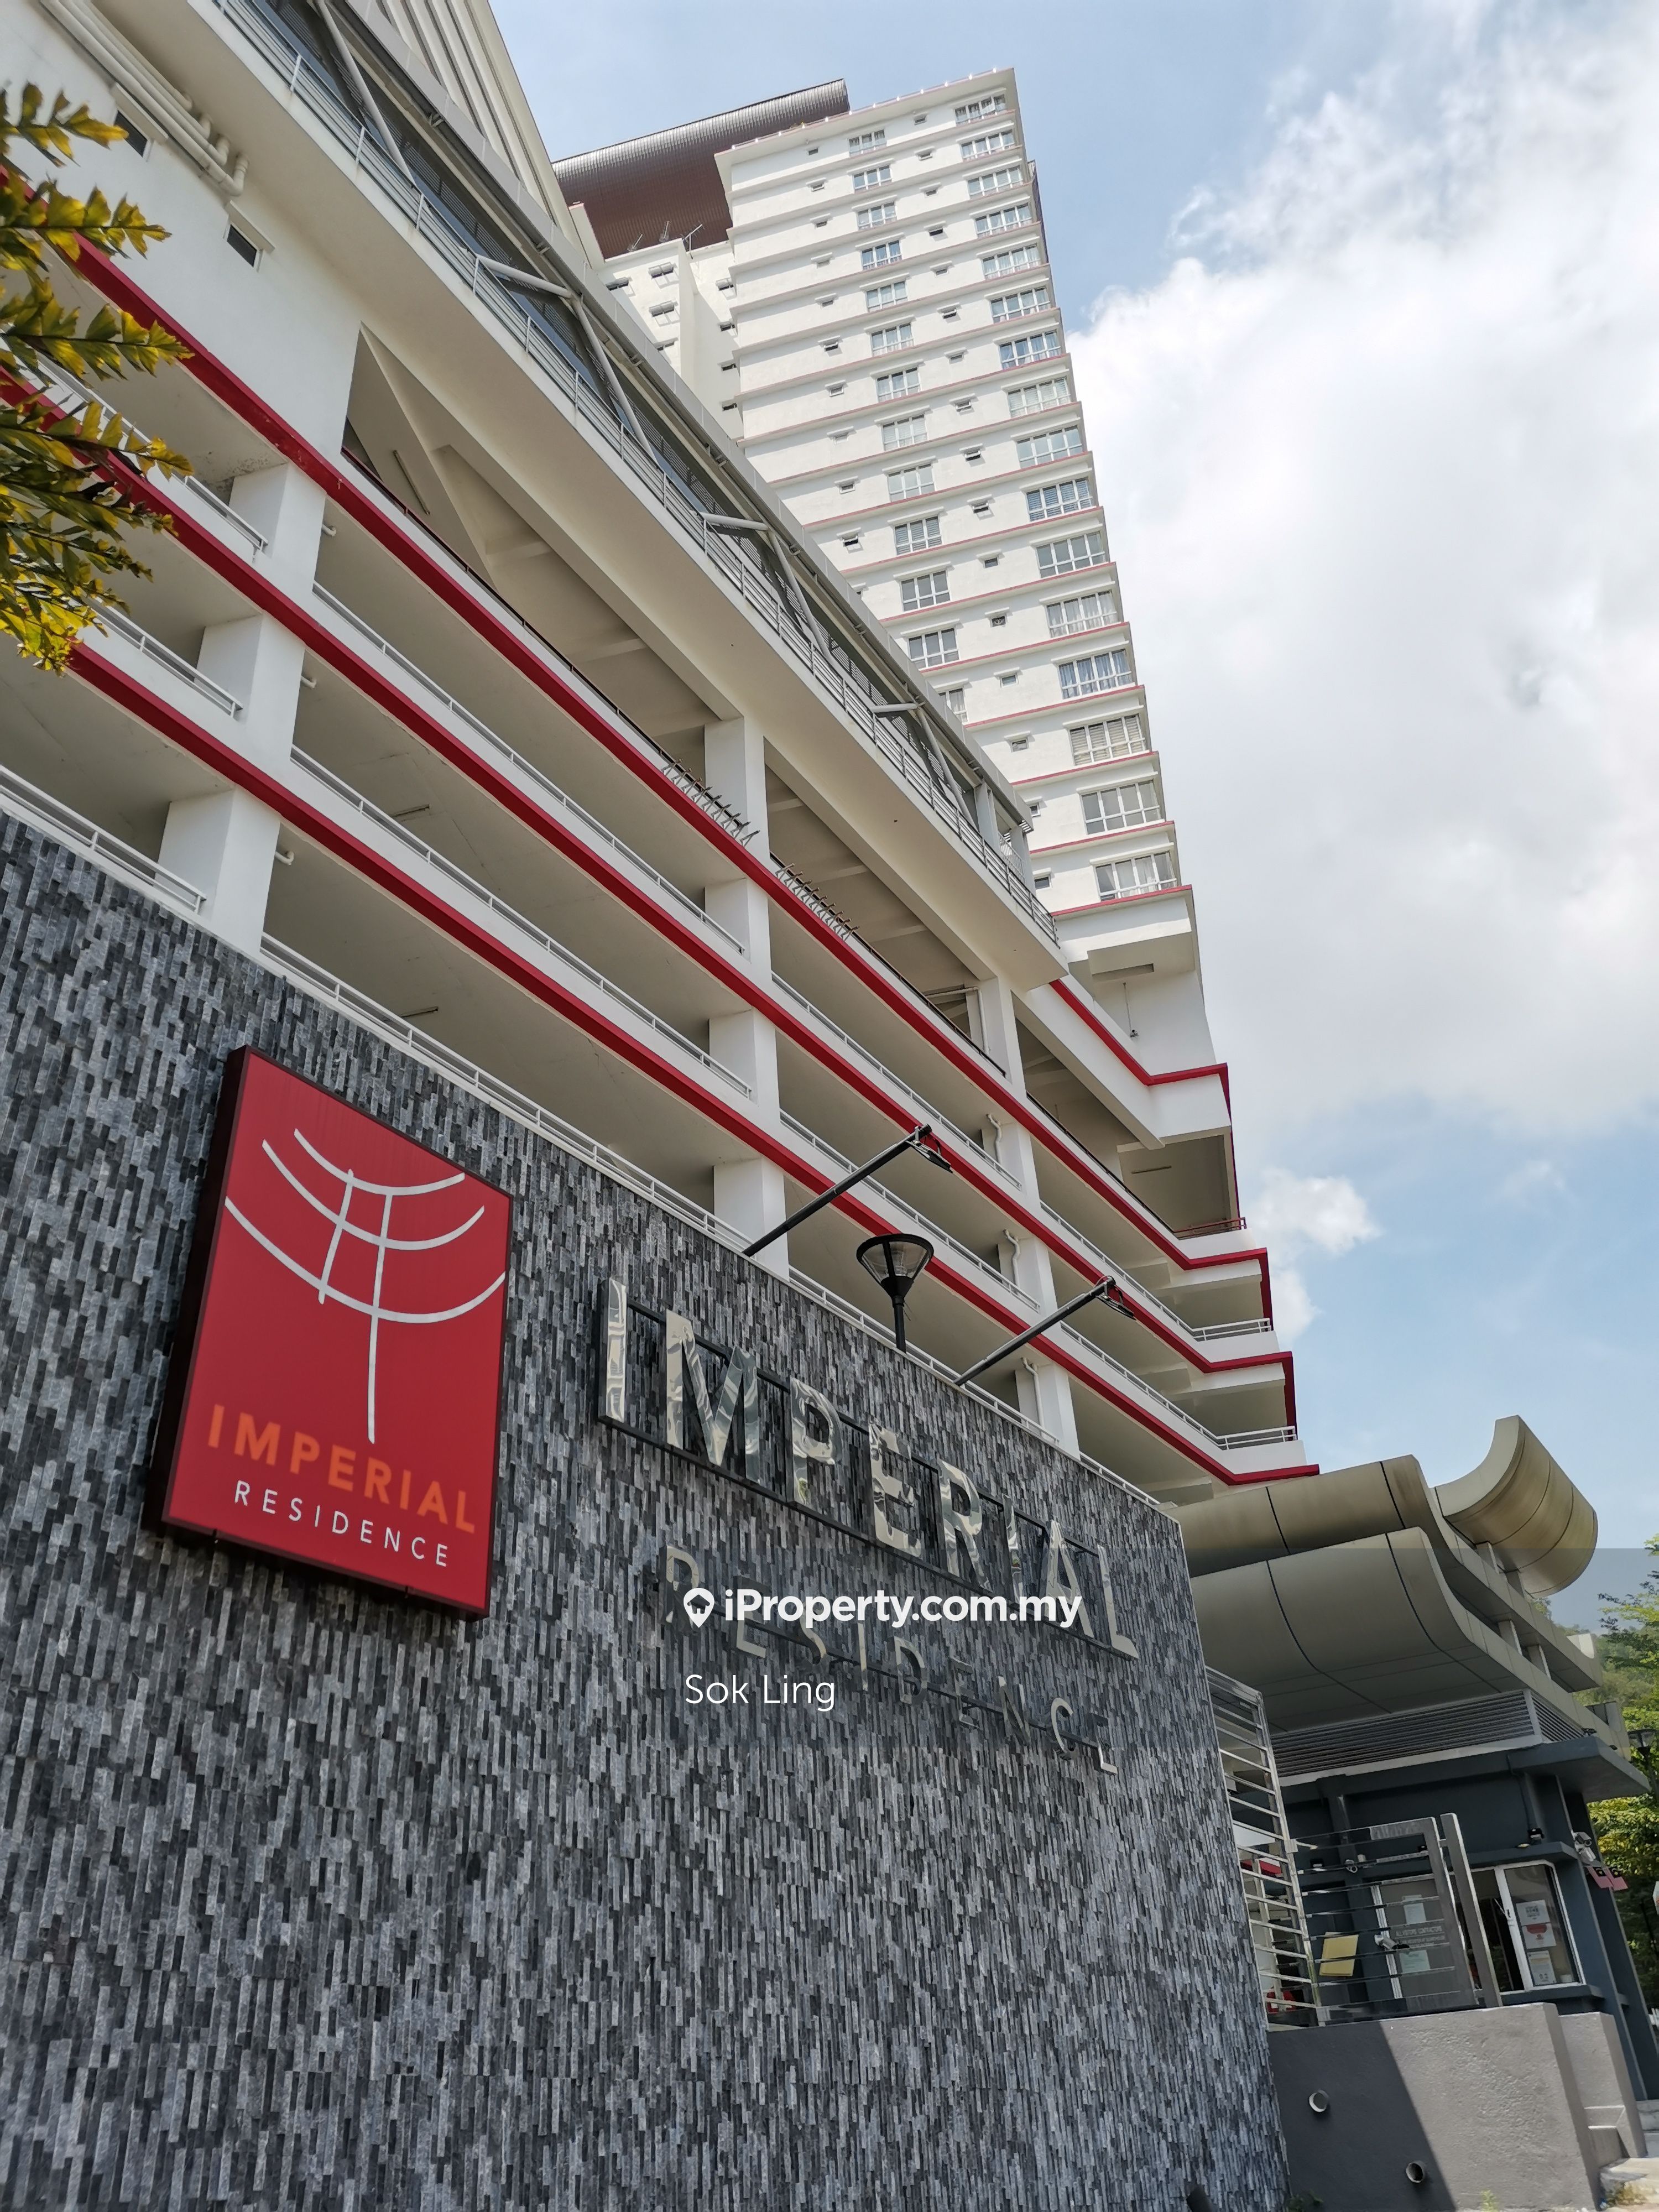 Cheras imperial residence Imperium Residence,